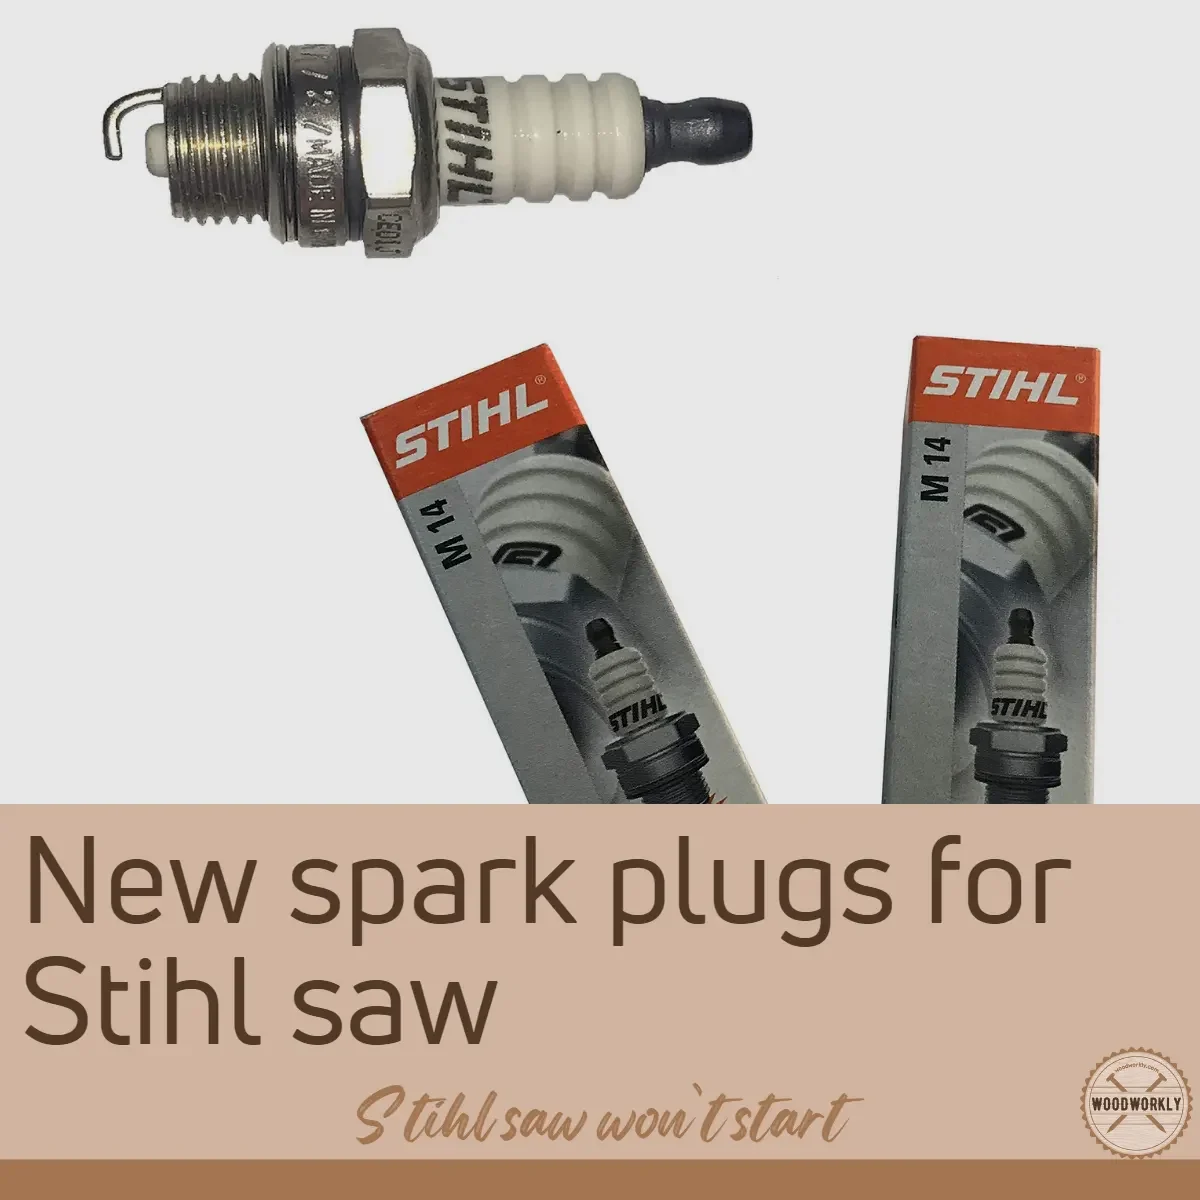 New spark plugs for Stihl saw